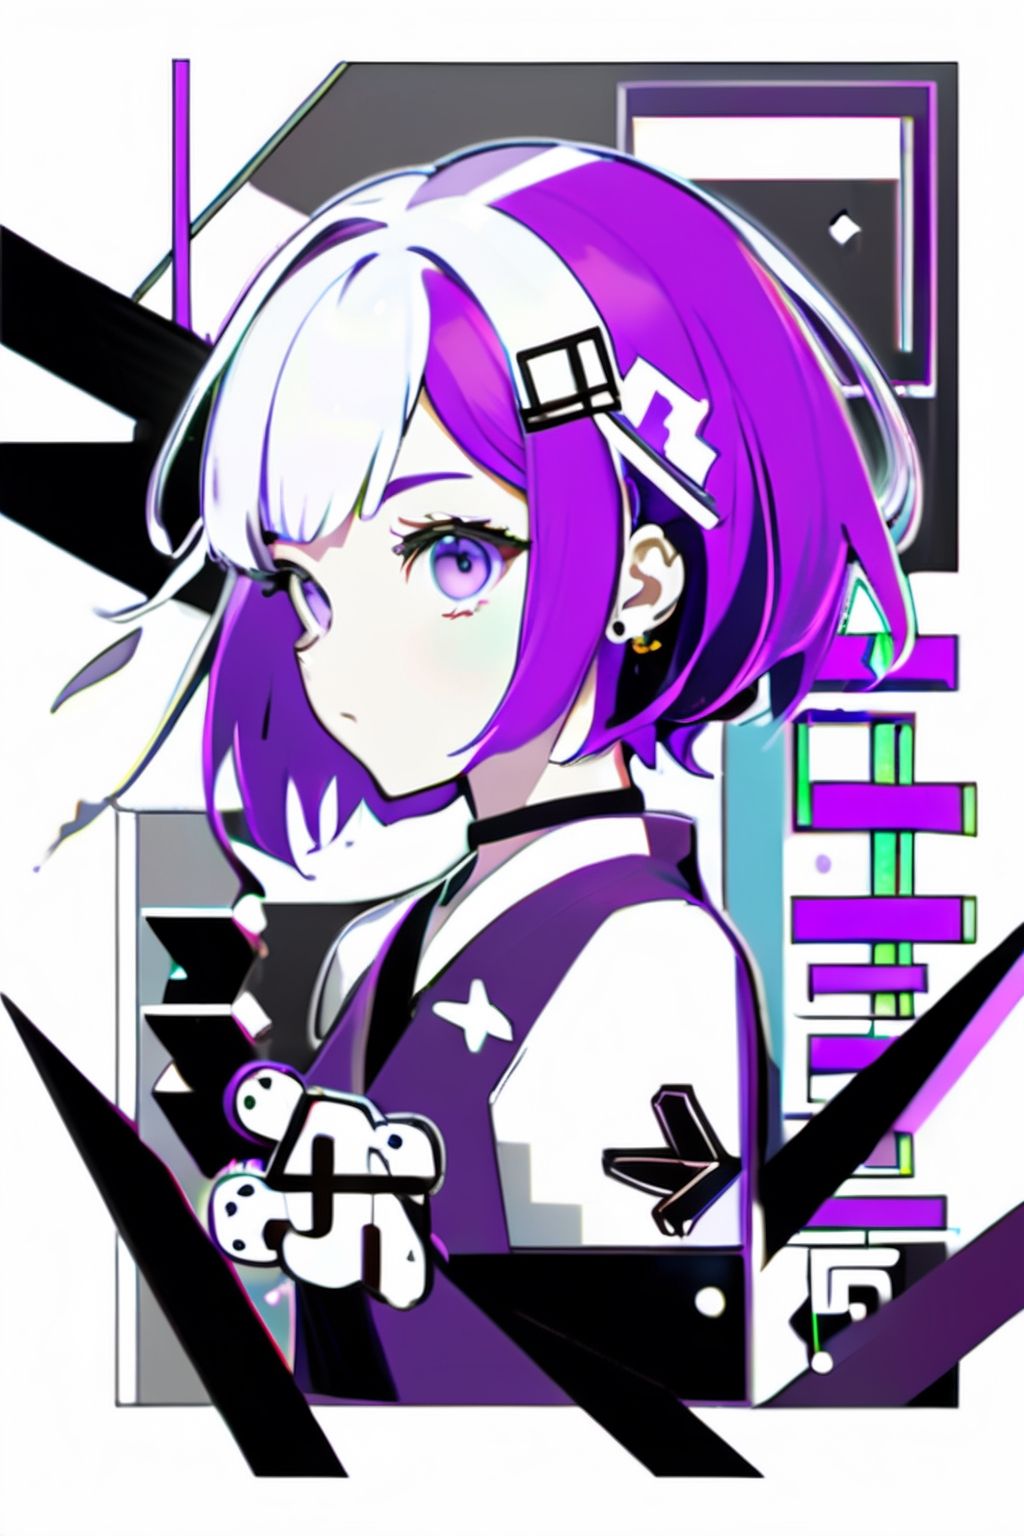 A purple-haired anime girl with a white streak in her hair and a white ribbon in her hair. She is wearing a purple and white shirt with a white bow on the left side of her neck. She is also wearing a black and white striped shirt with a white collar. She is holding a white controller in her right hand. She is wearing a black and white striped bracelet on her left wrist. She is also wearing a black and white bow on her left ear. She is standing in front of a black, white, and purple background. - Low poly